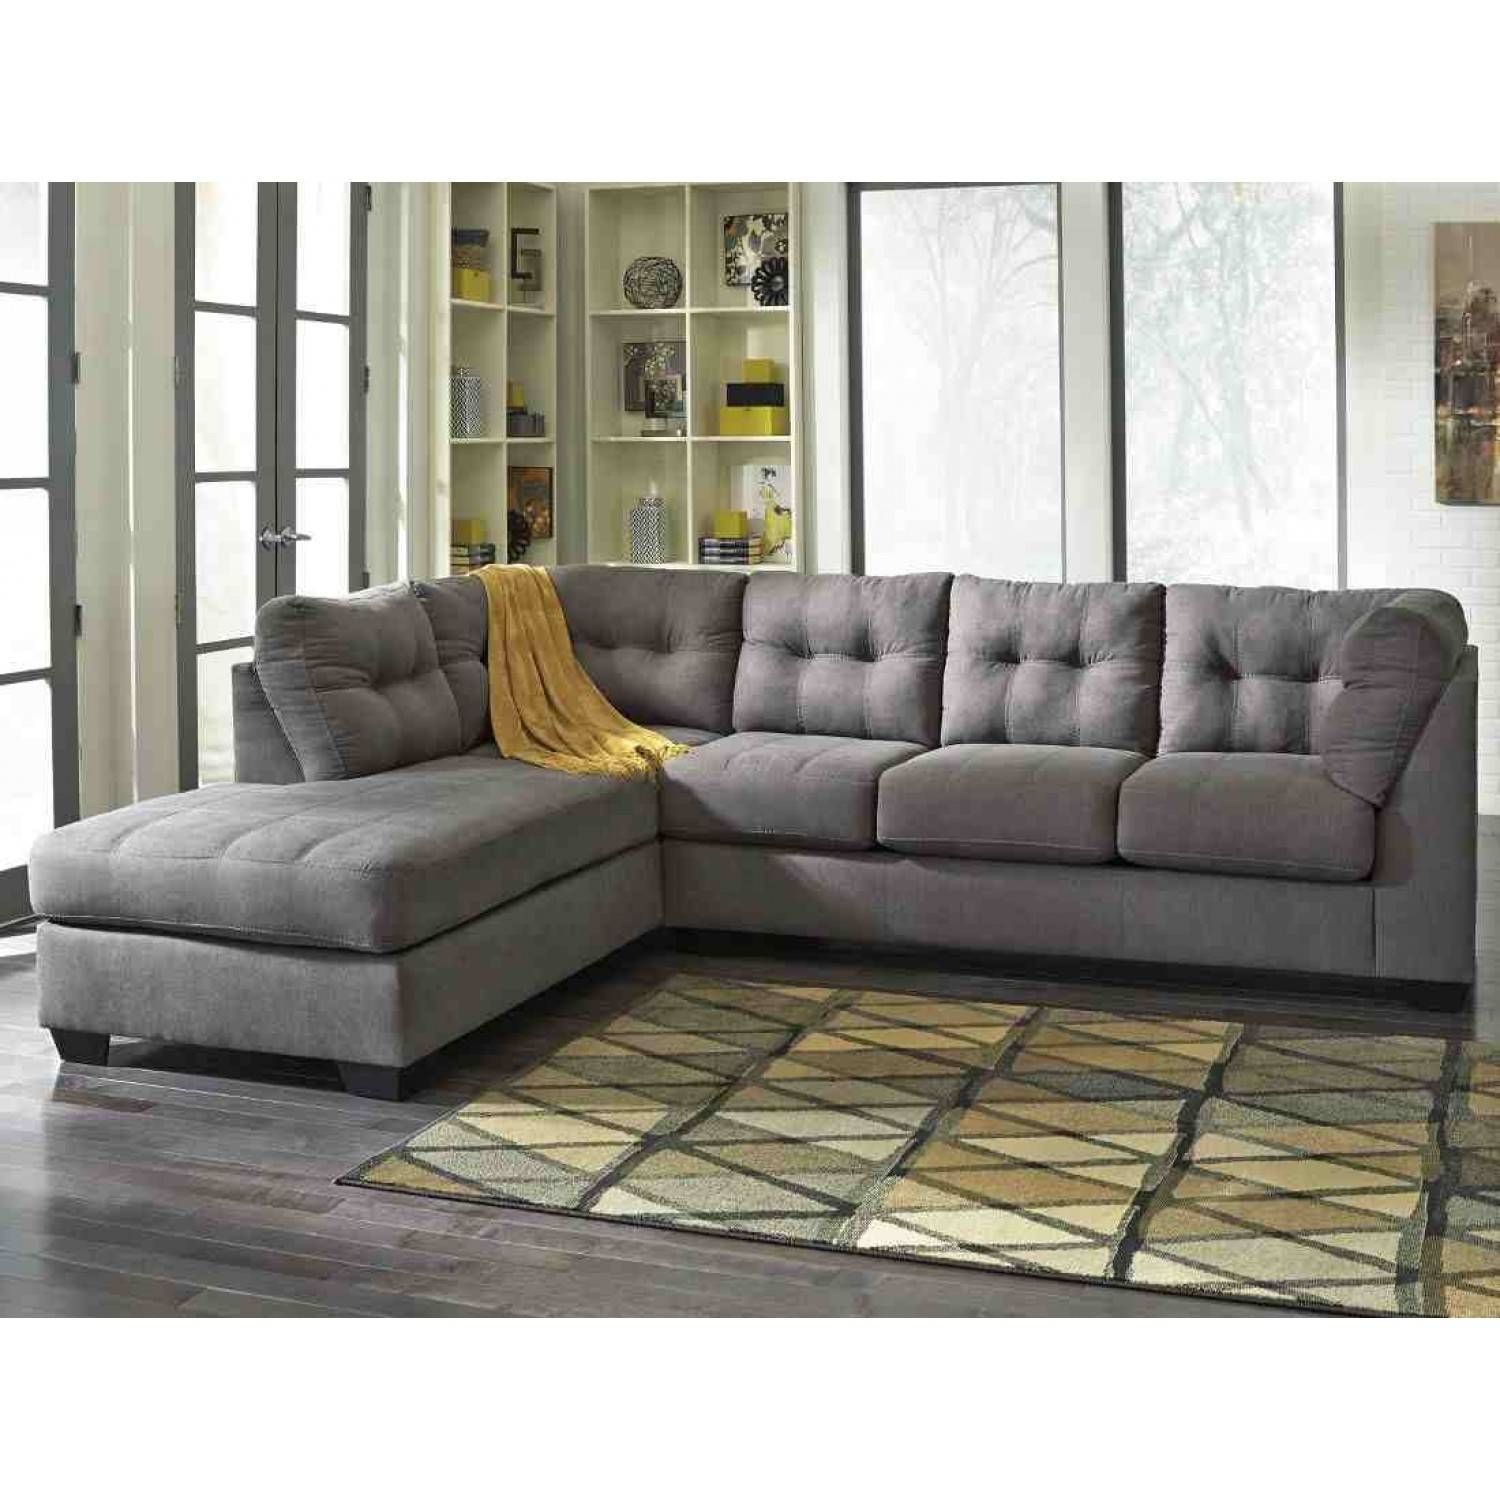 Ashley Furniture Maier Sectional In Charcoal | Local Furniture Outlet With Austin Sectional Sofa (Photo 6 of 30)